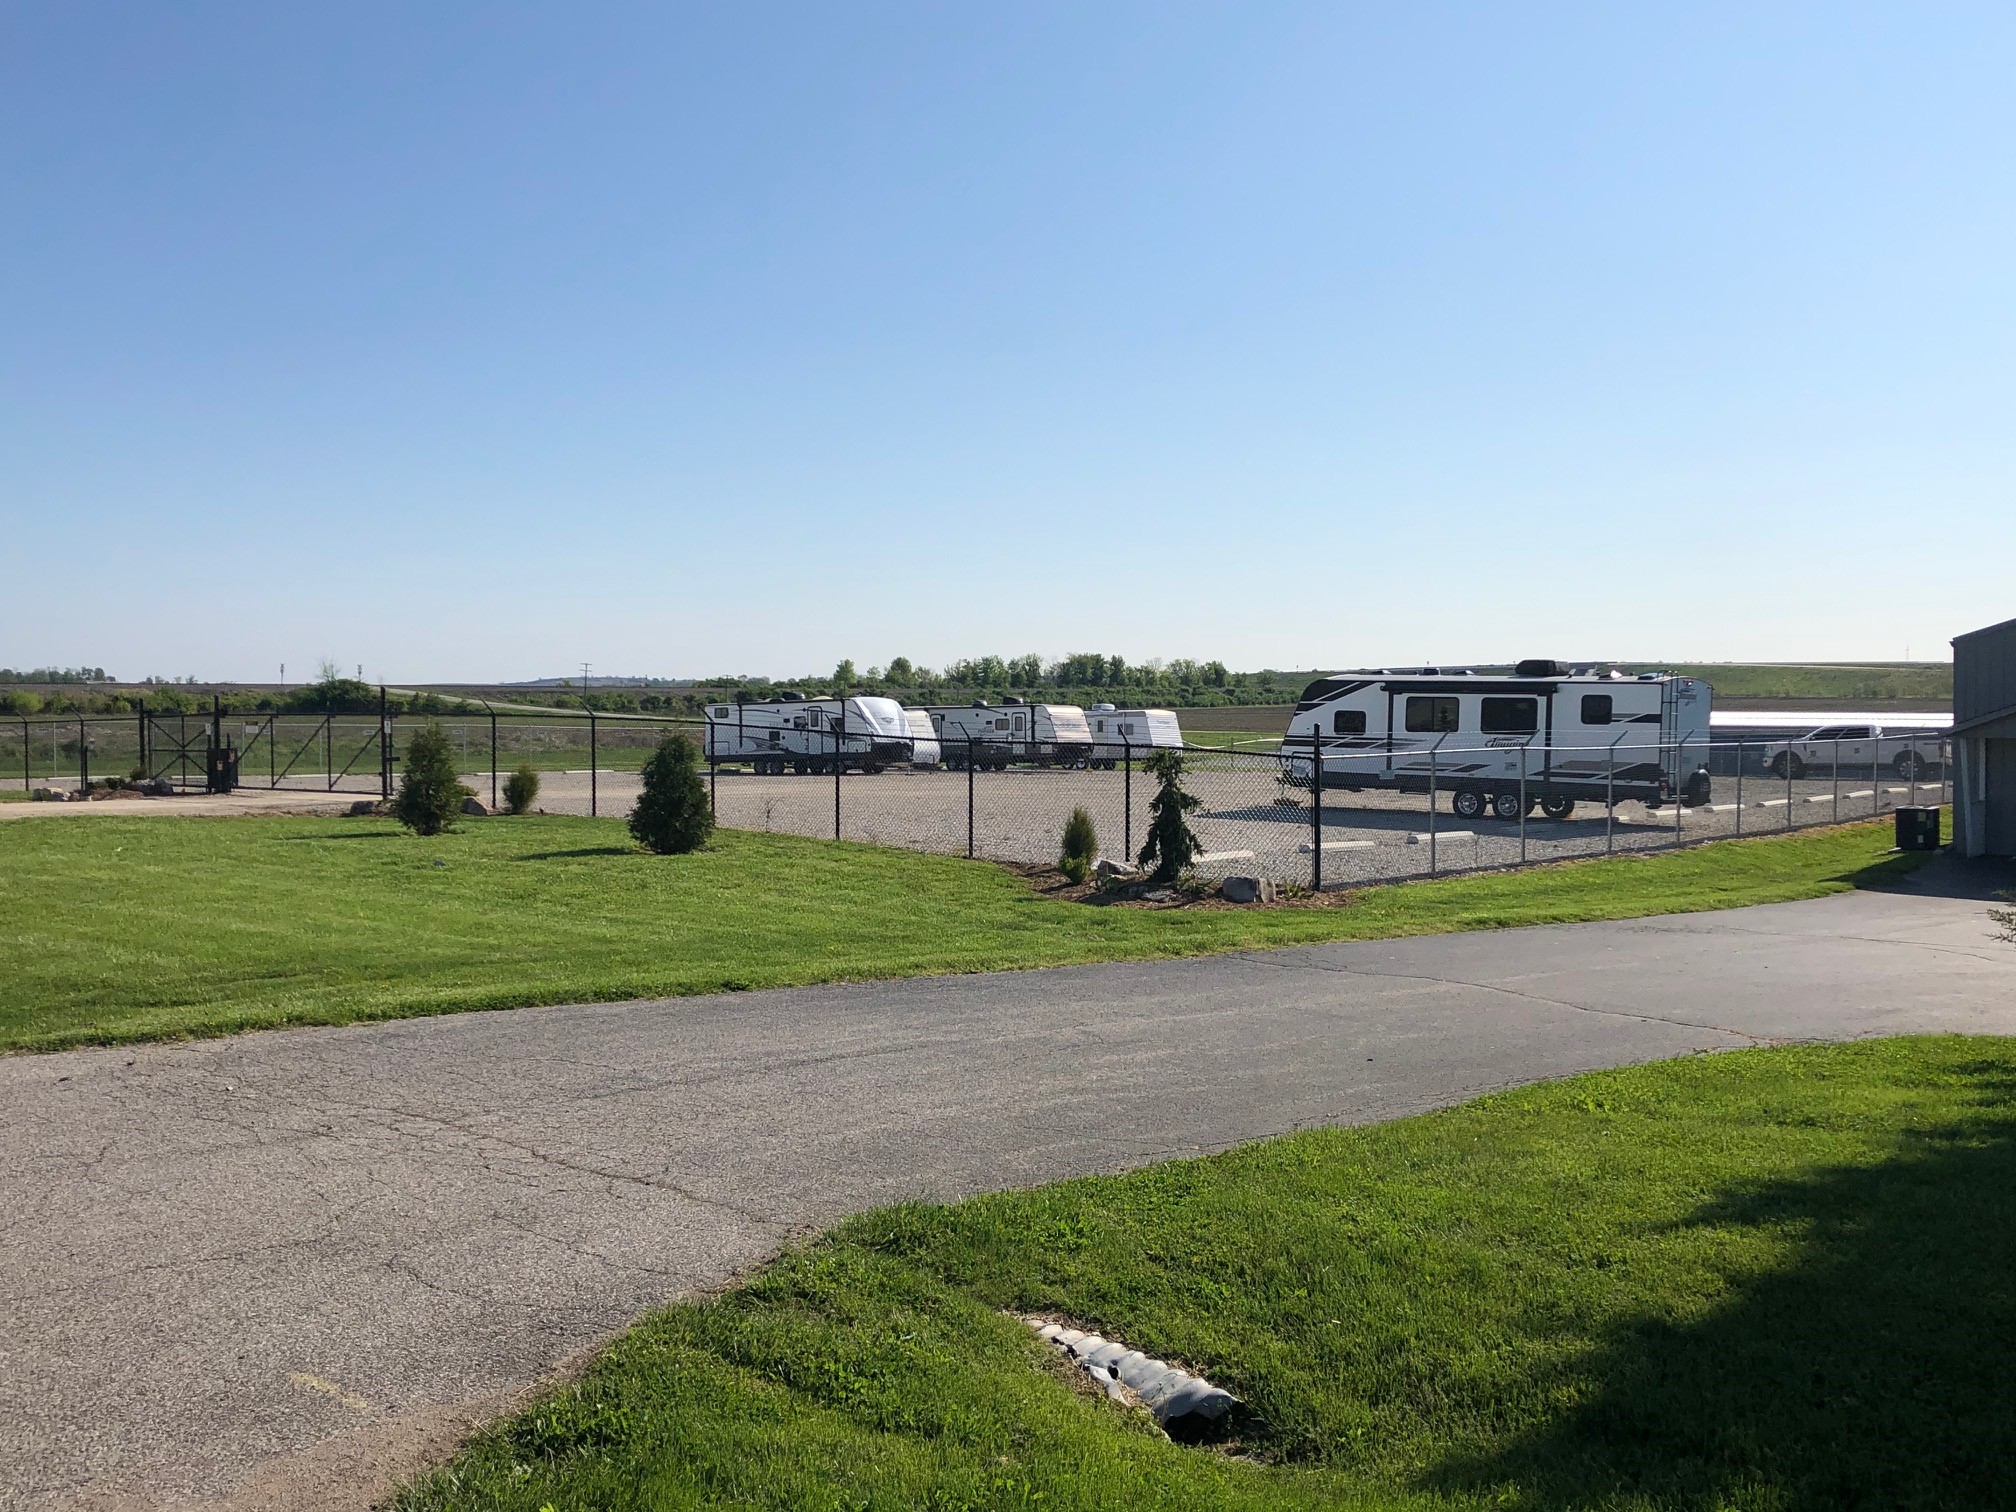 Secured and fenced area for boat and RV parking at Washington, IN Access Storage, providing safe and spacious storage options.